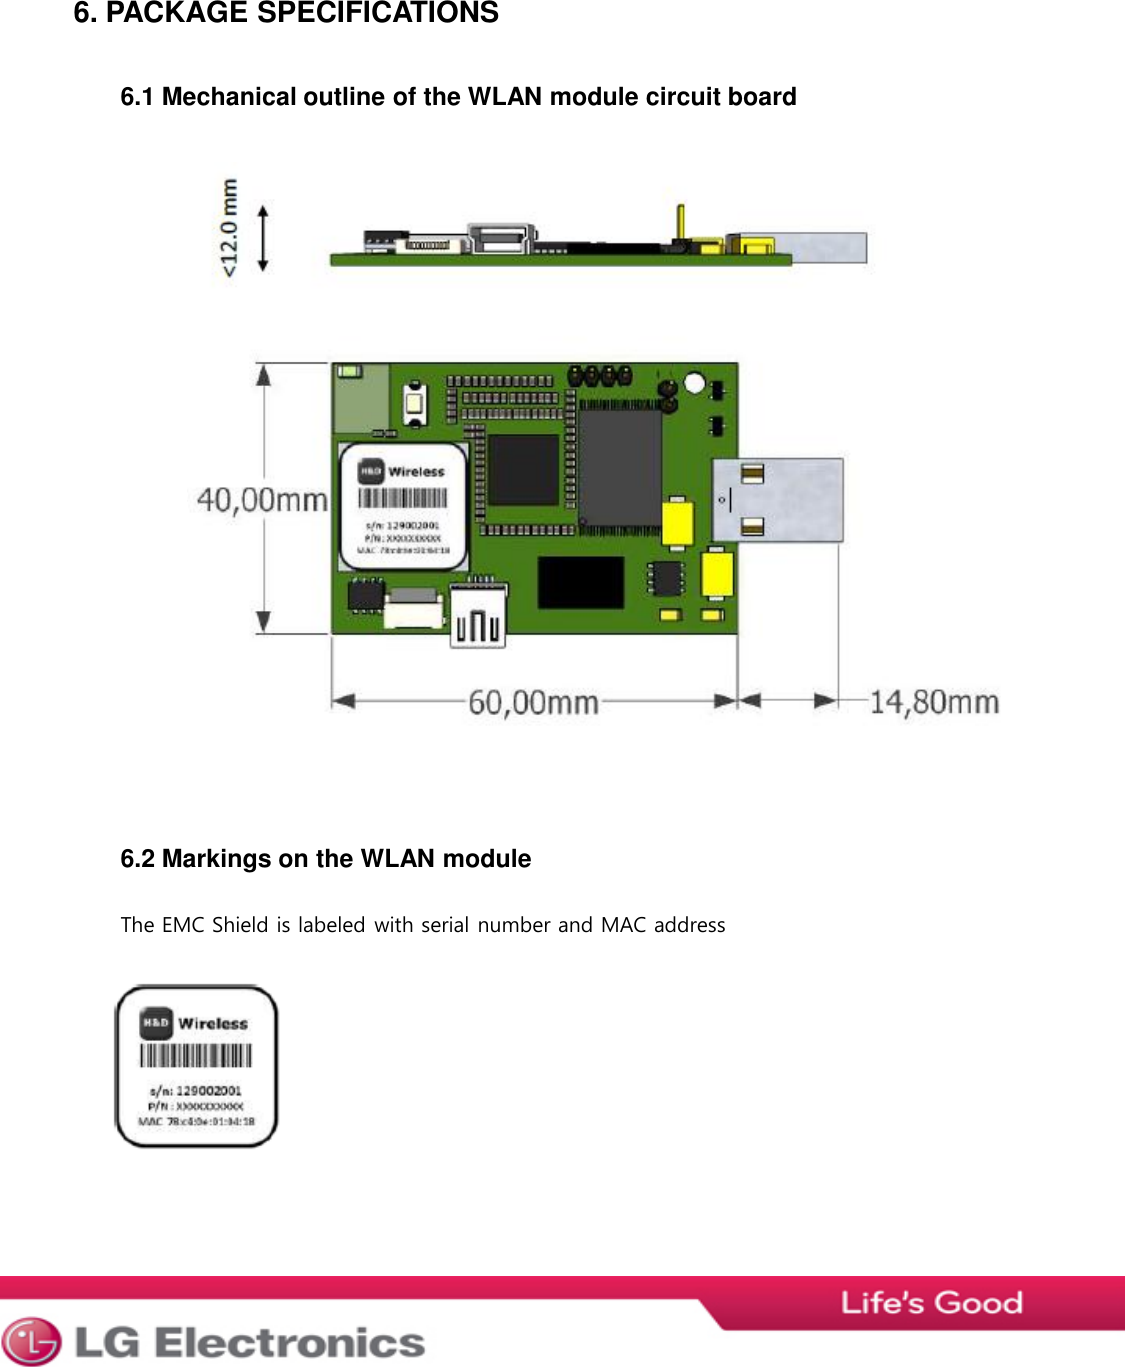 6. PACKAGE SPECIFICATIONS6.1 Mechanical outline of the WLAN module circuit board6.2 Markings on the WLAN moduleThe EMC Shield is labeled with serial number and MAC address